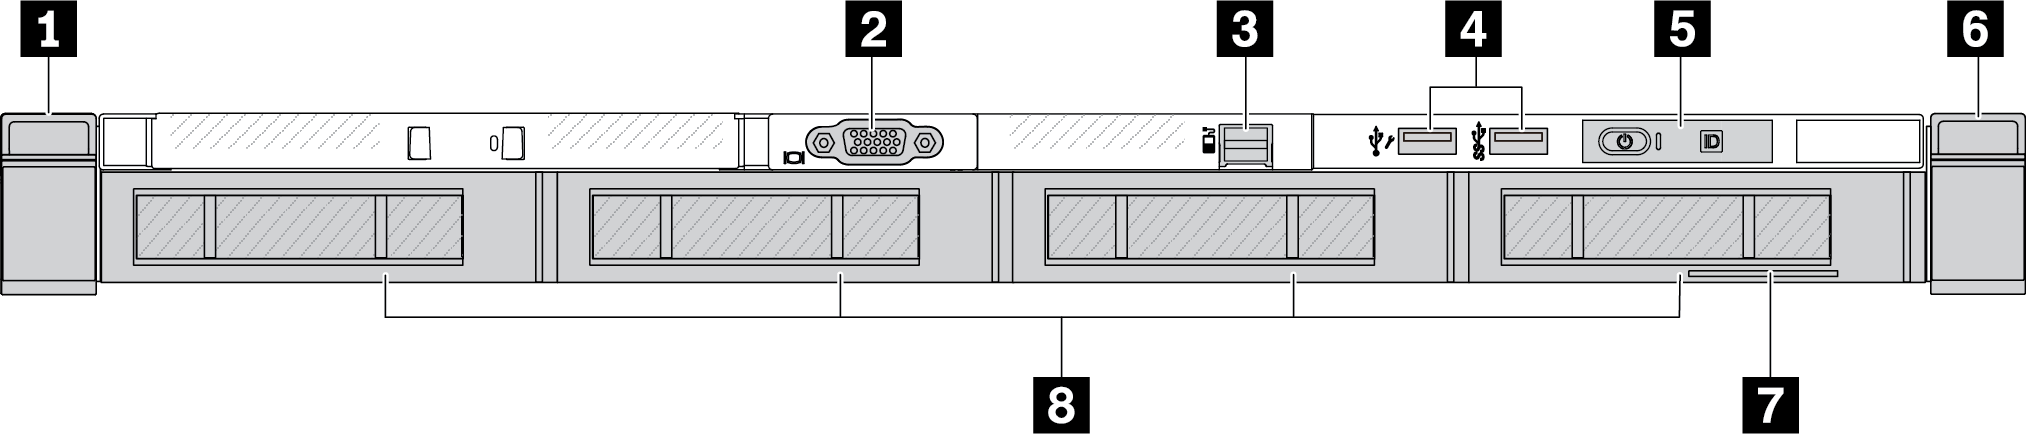 Server model with four 3.5'' drive bays (backplane-less)